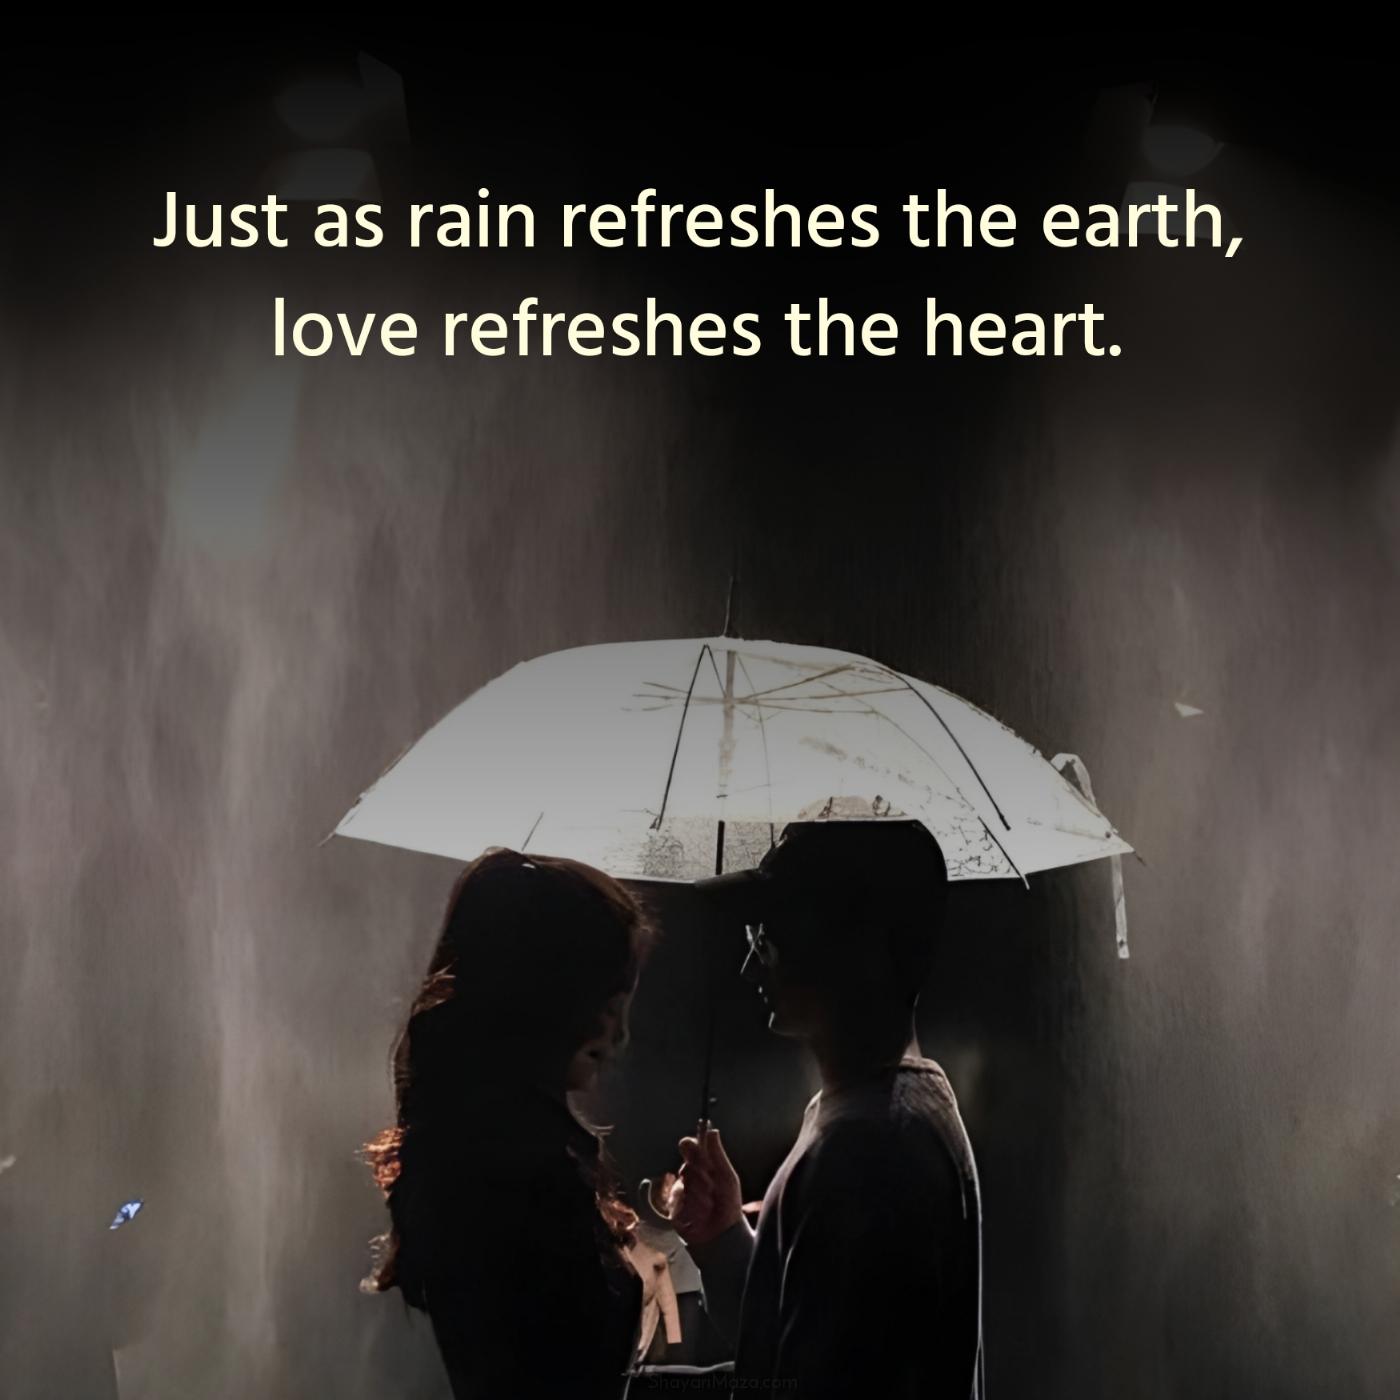 Just as rain refreshes the earth love refreshes the heart